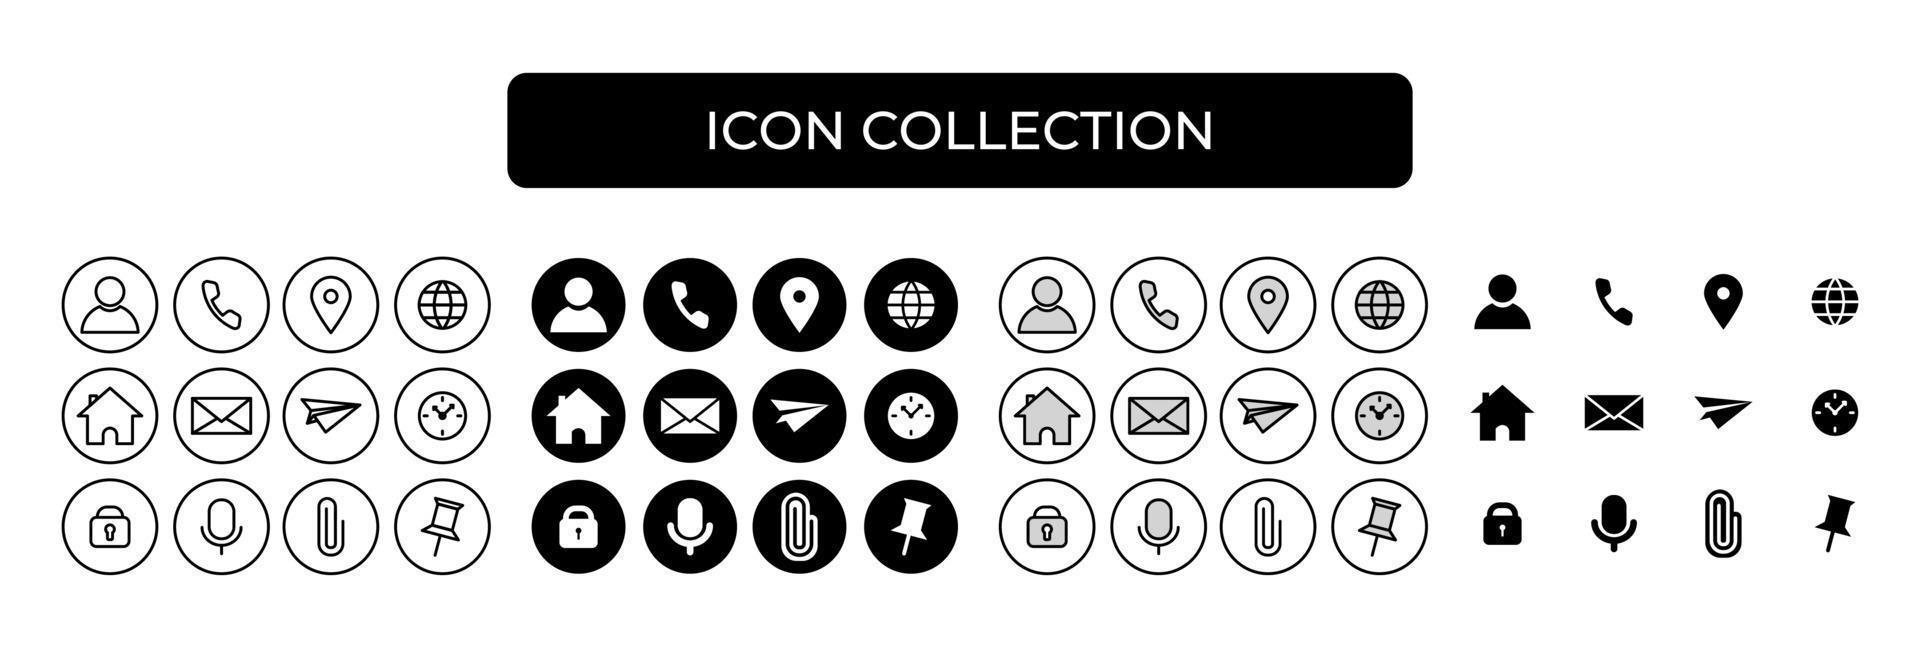 Website black vector icons set. Communication icon symbol, contact us, location, address, phone, mail, microphone, attach, pin. In flat, line modern style.